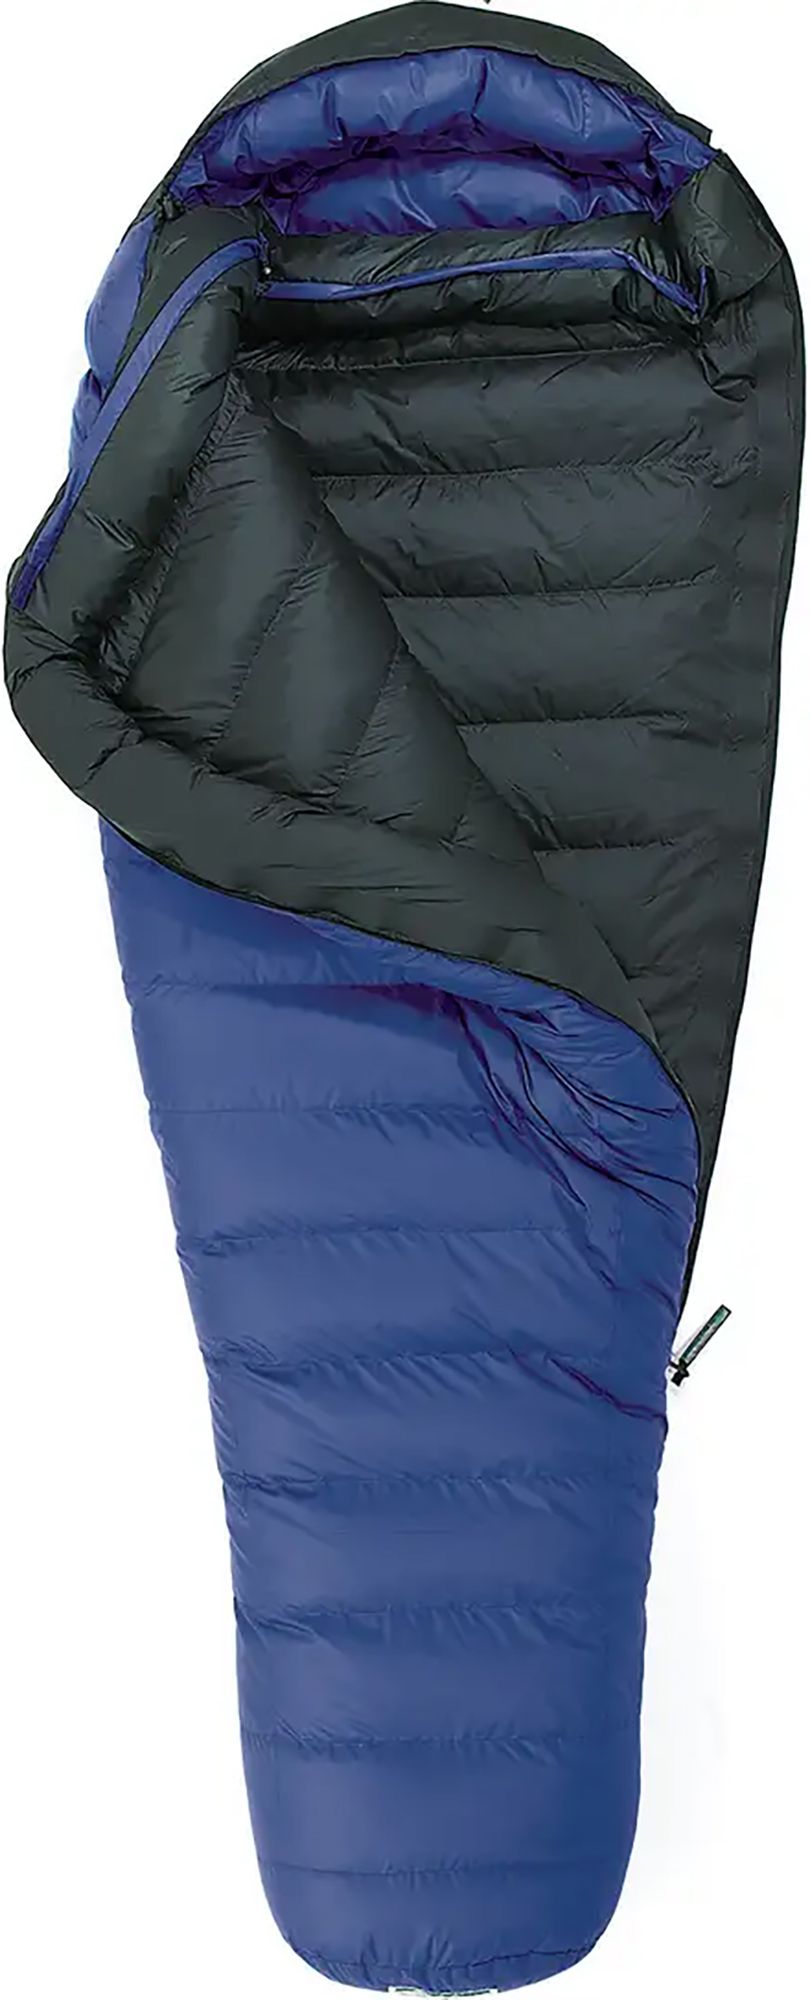 Photos - Other Bags & Accessories Western Mountaineering Antelope MF 5 Sleeping Bag, Right Hand, Men's, Shor